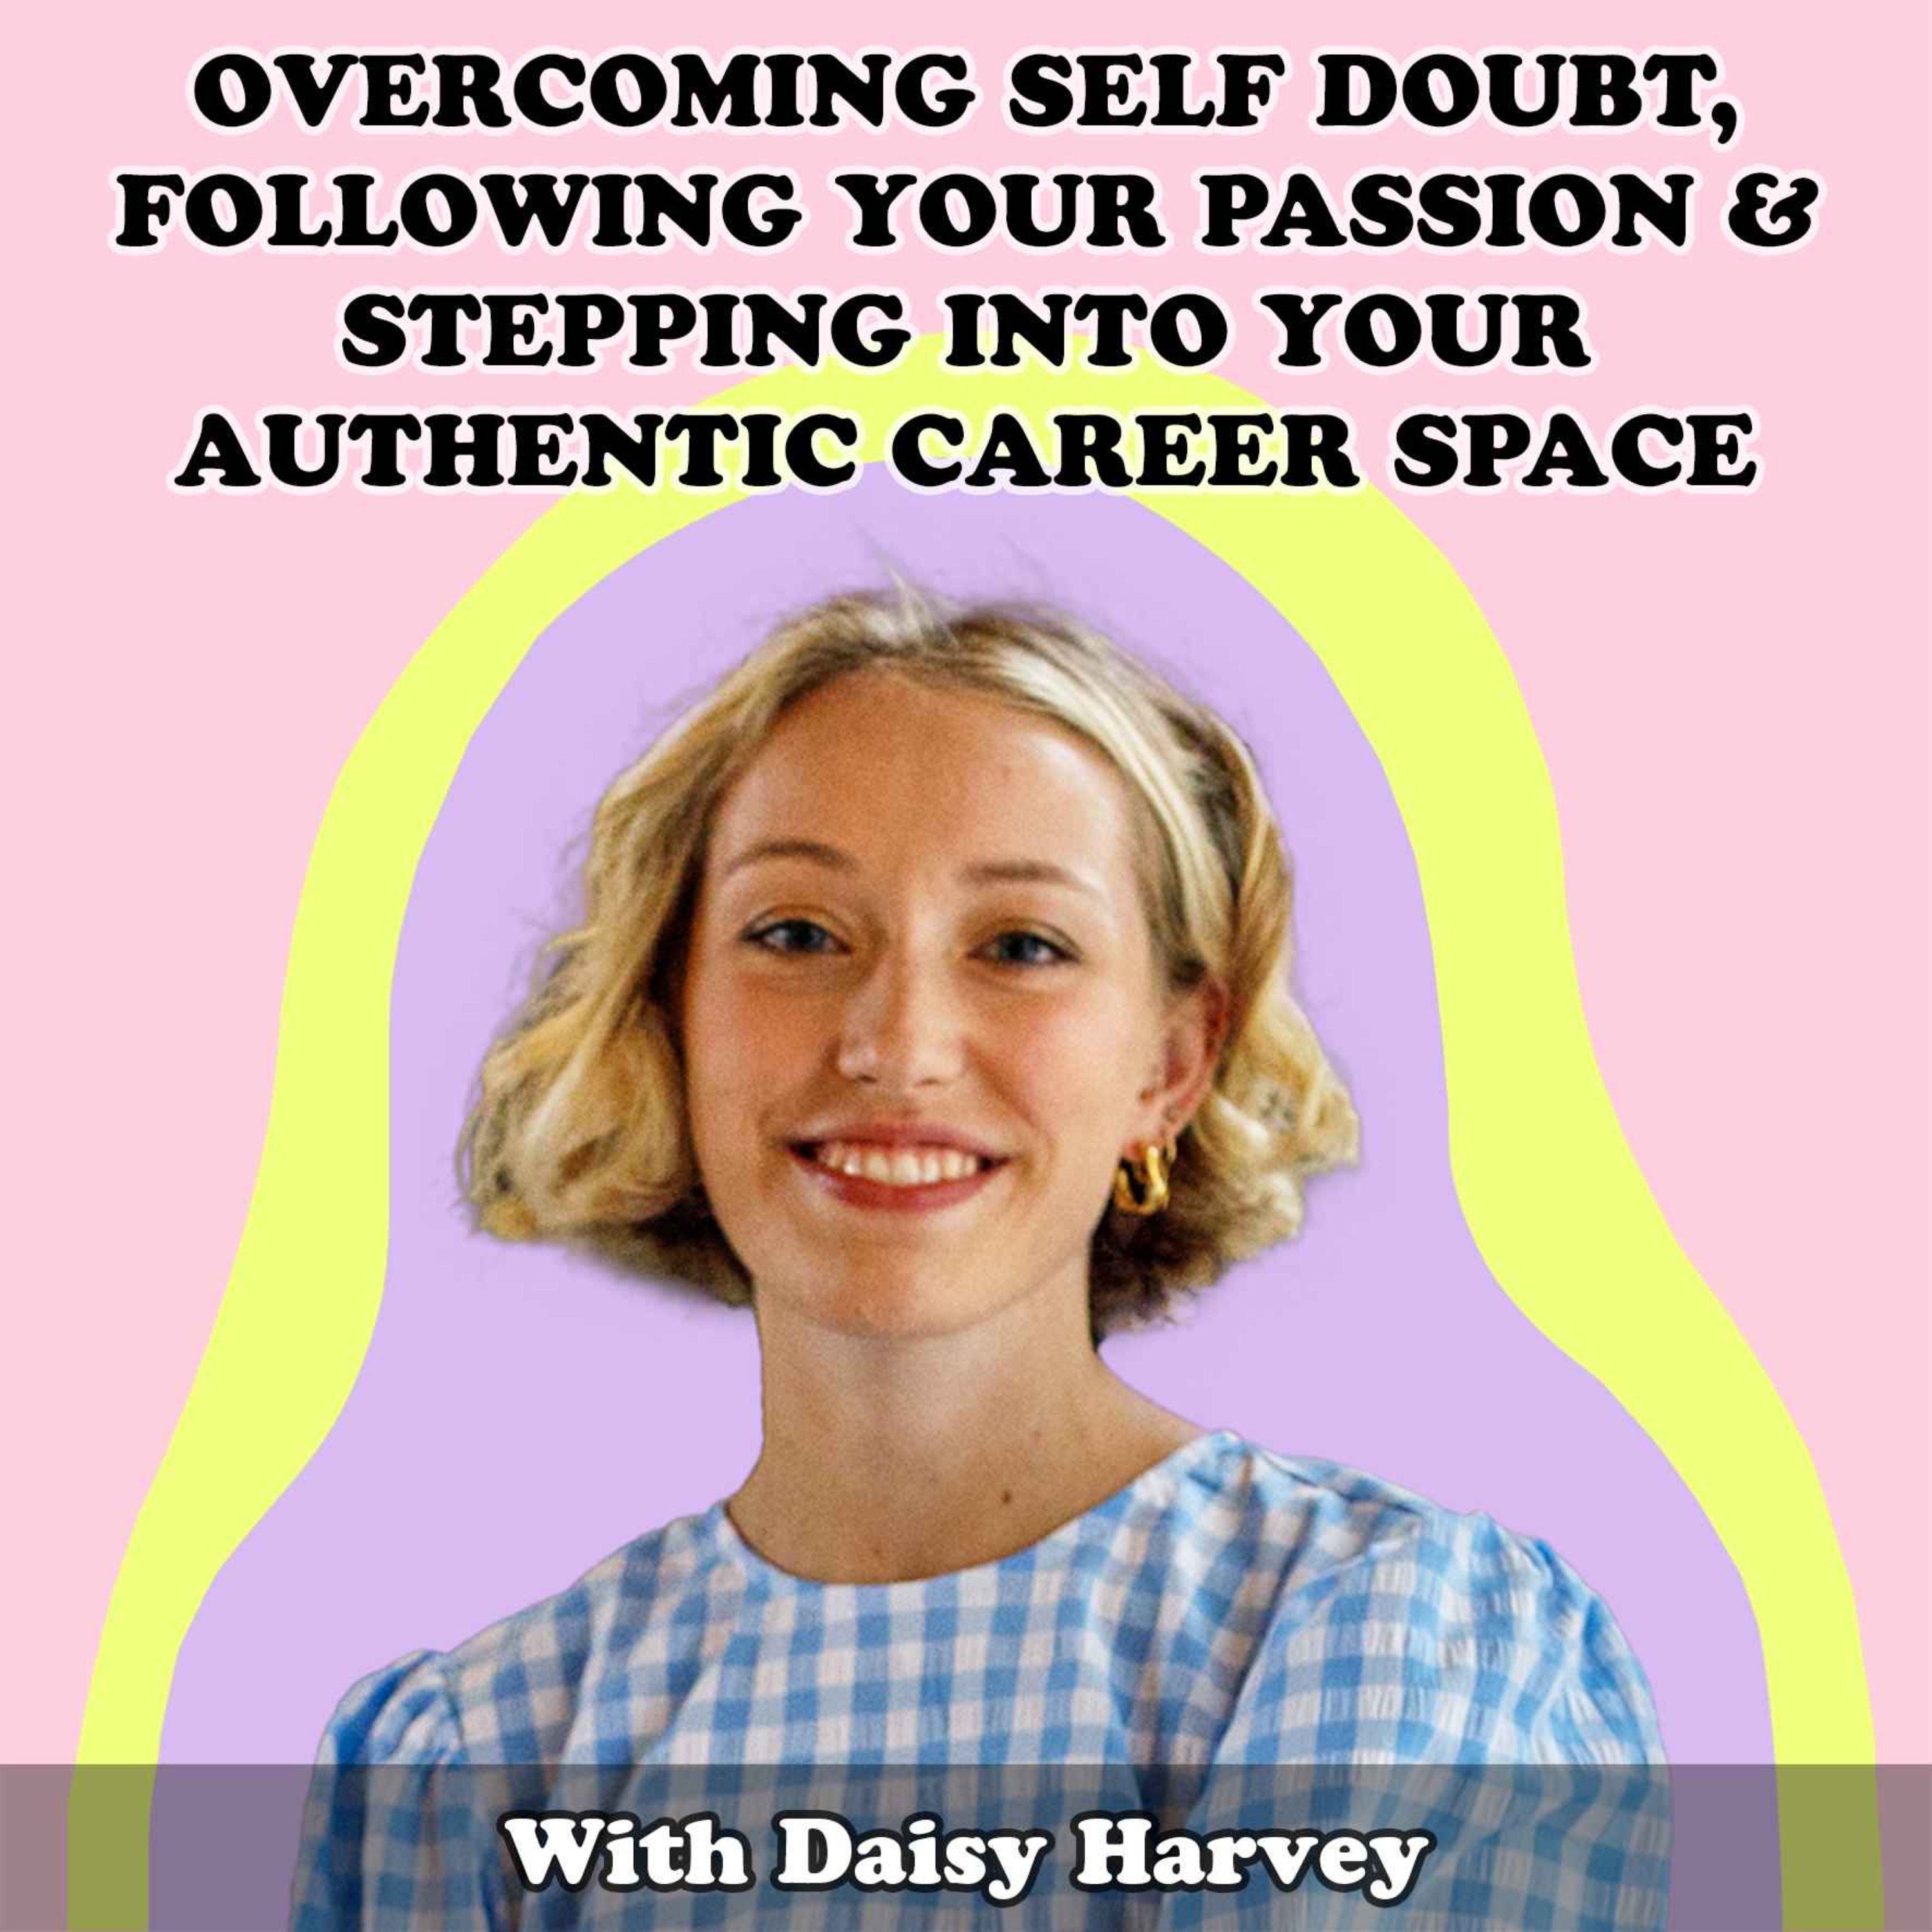 #26 Overcoming Self Doubt, Following Your Passion & Stepping Into Your Authentic Career Space With Daisy Harvey